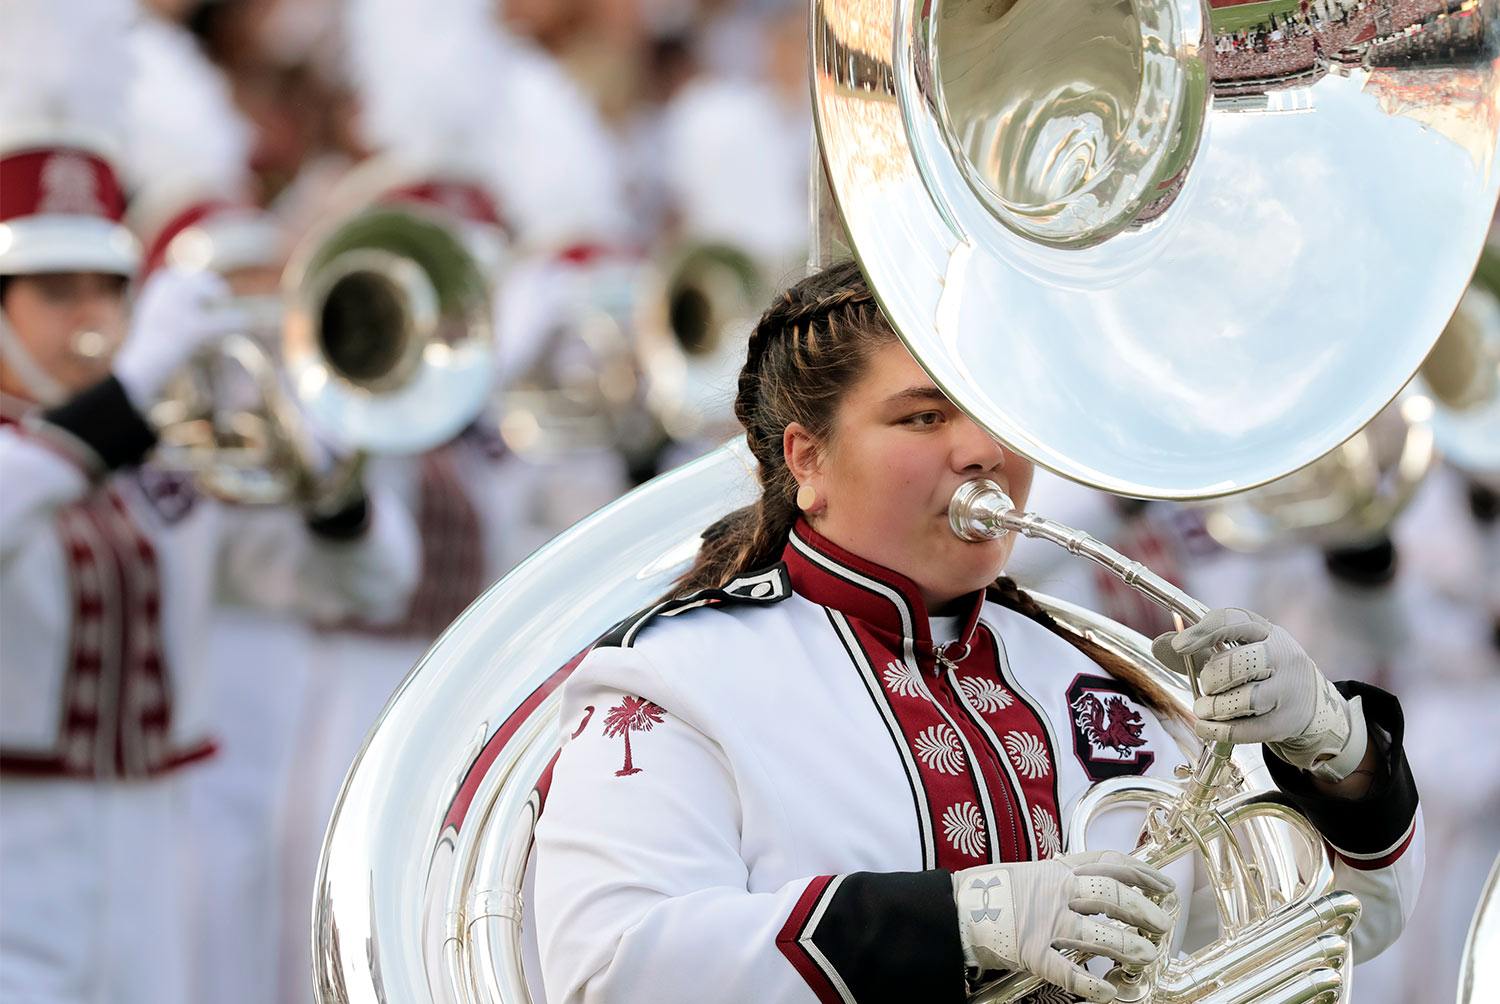 Marching band member playing the sousaphone dressed in full uniform at a football game.  